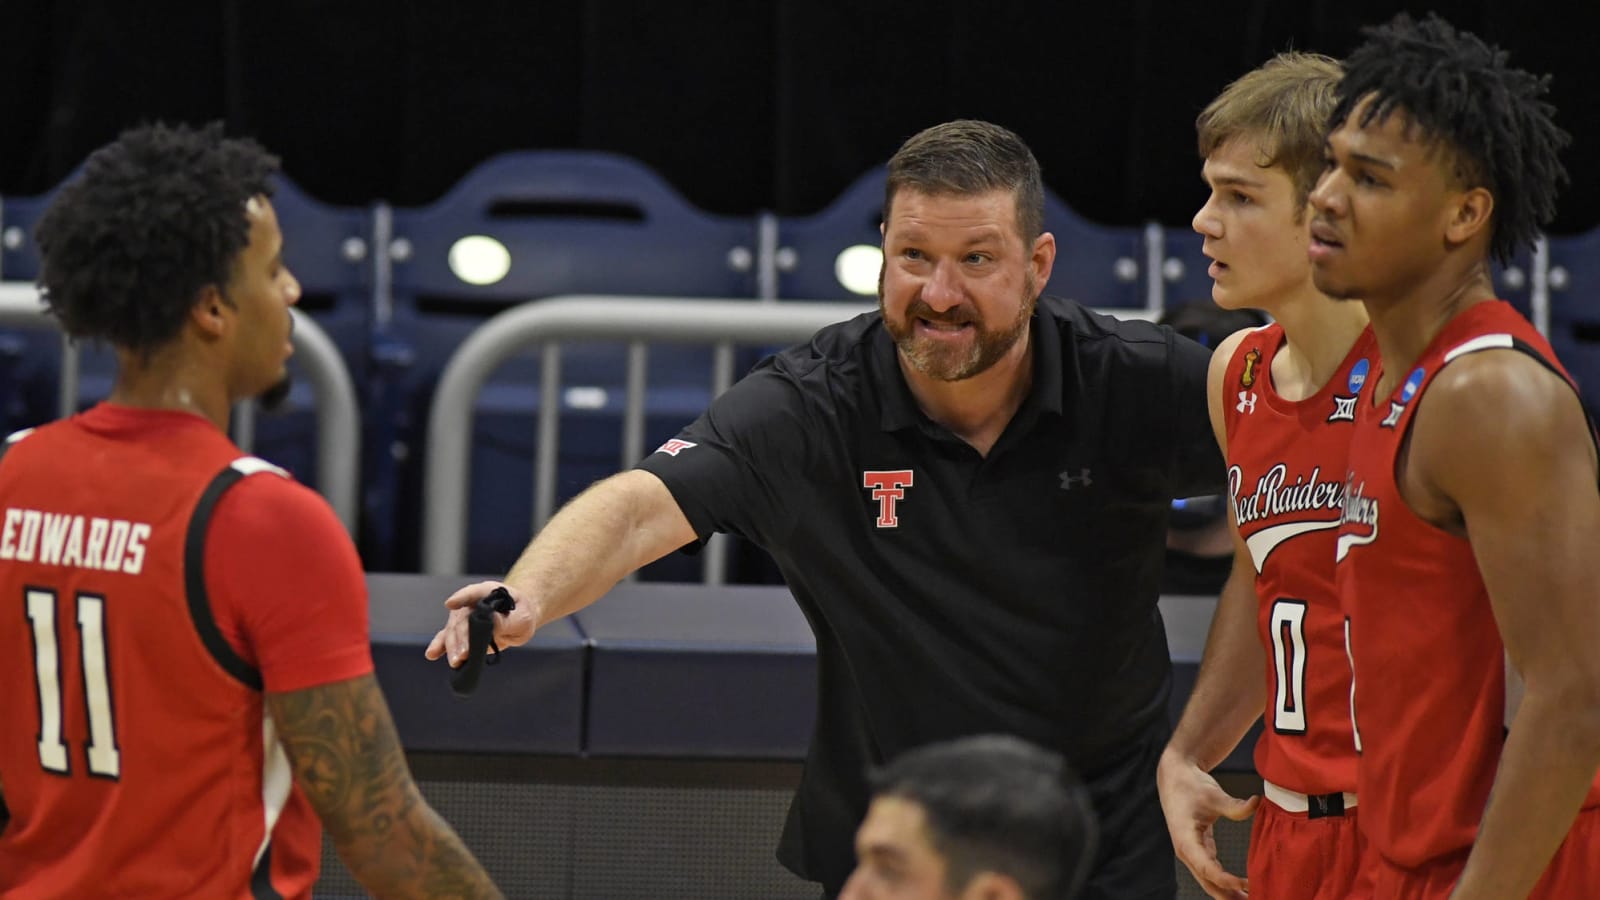 Chris Beard issues statement to Texas Tech fans after leaving for Texas